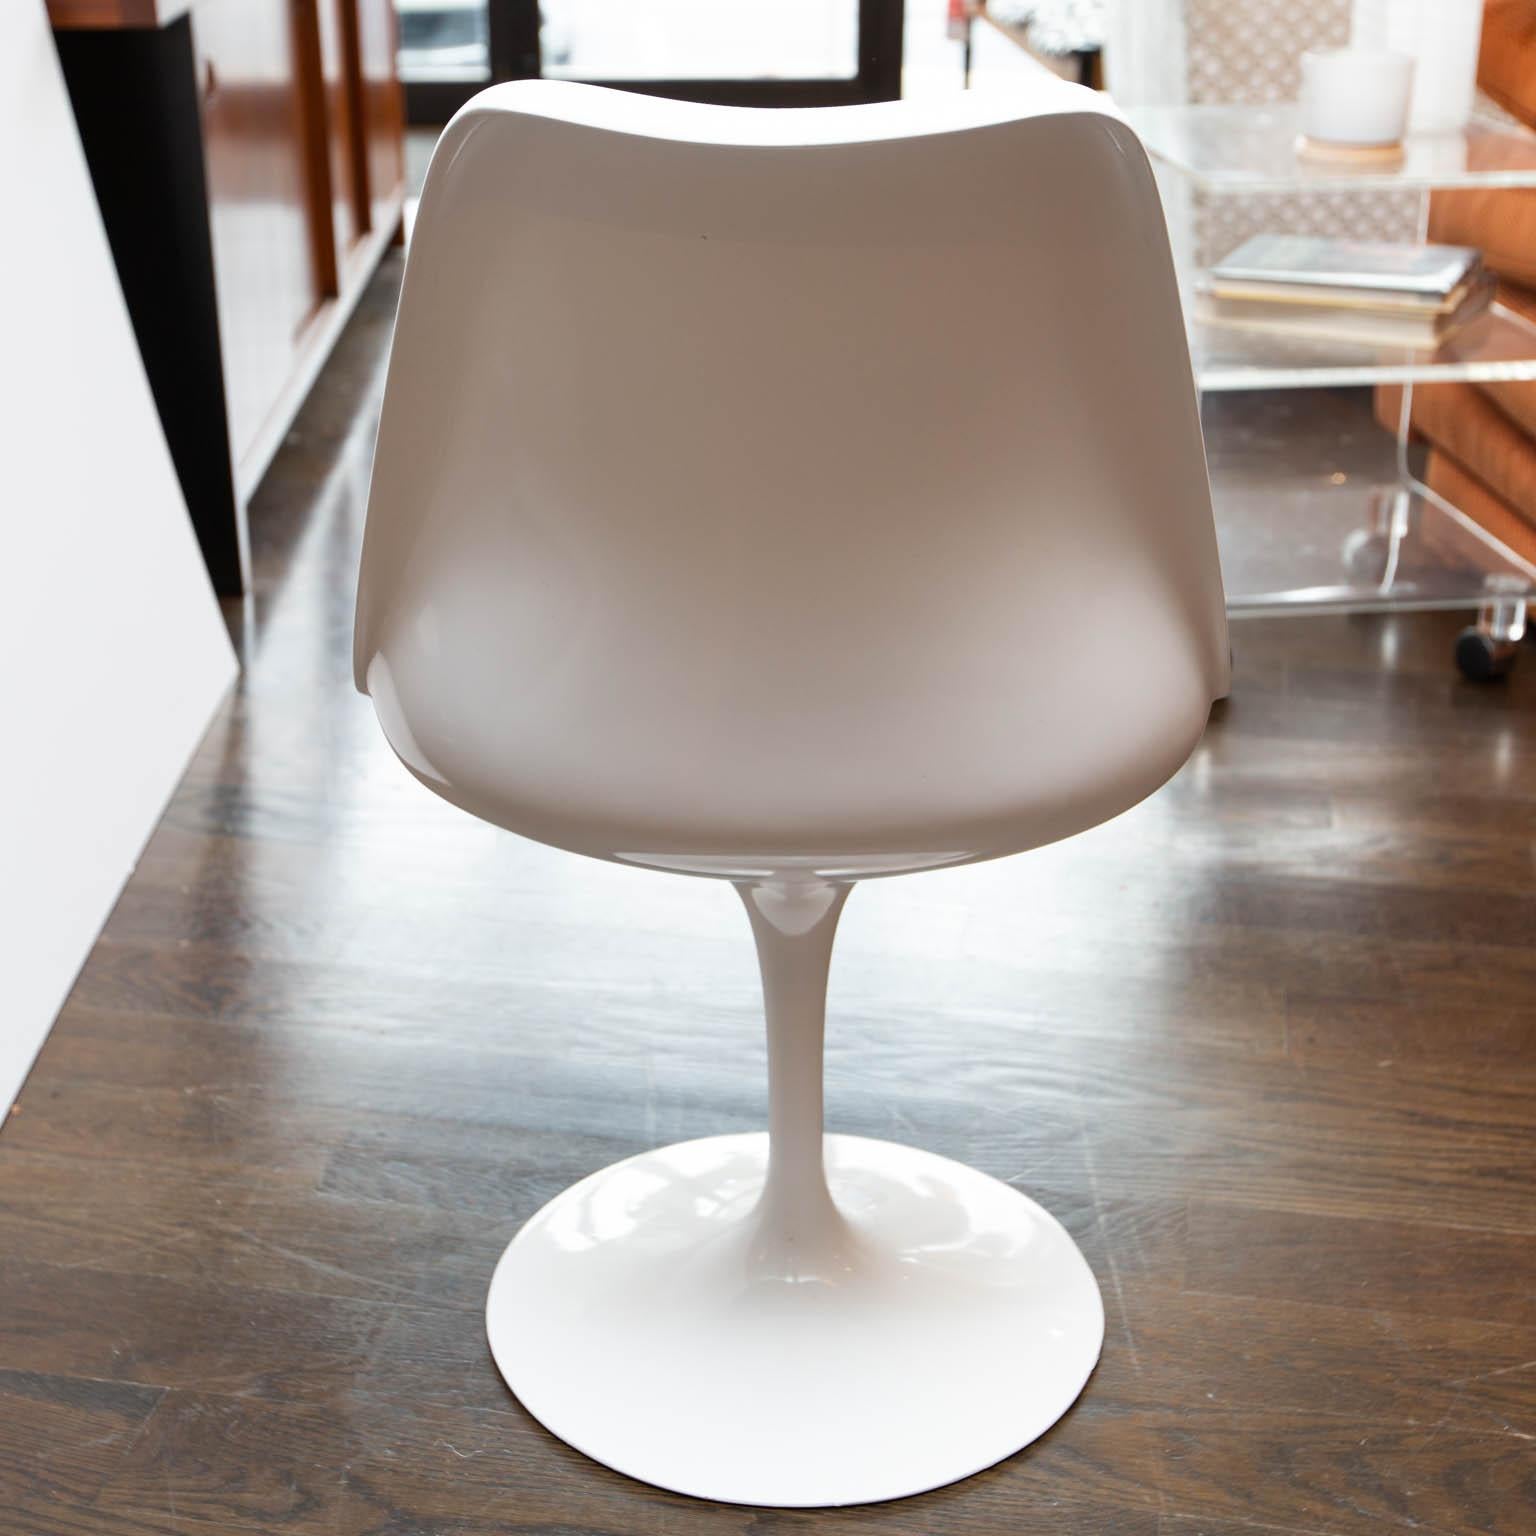 Set of Six Eero Saarinen Tulip Chairs for Knoll In Excellent Condition For Sale In New London, CT